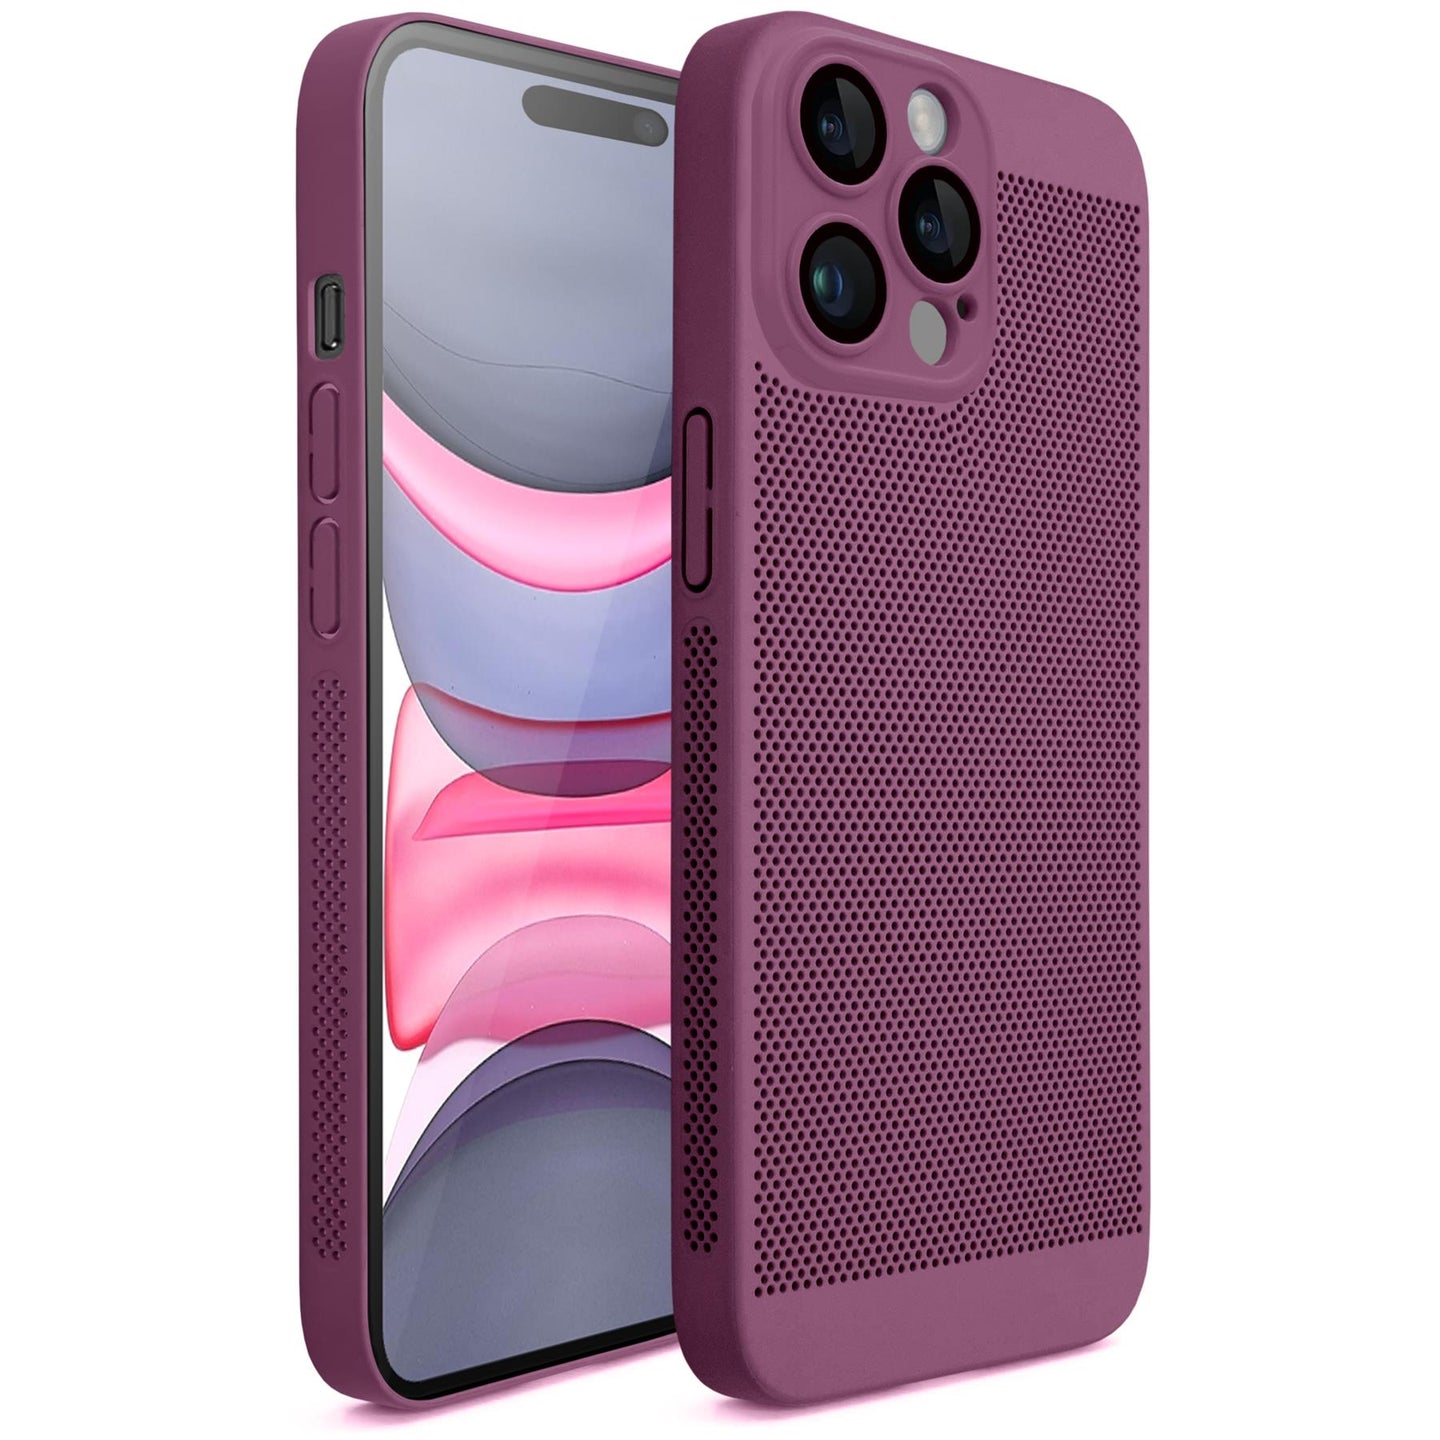 Moozy VentiGuard Case for iphone 15 pro, 6.1-inch, Breathable Cover with Perforated Pattern for Air Circulation, Ventilation, Anti-Overheating phone case for iphone 15 pro, 15 pro case, Purple